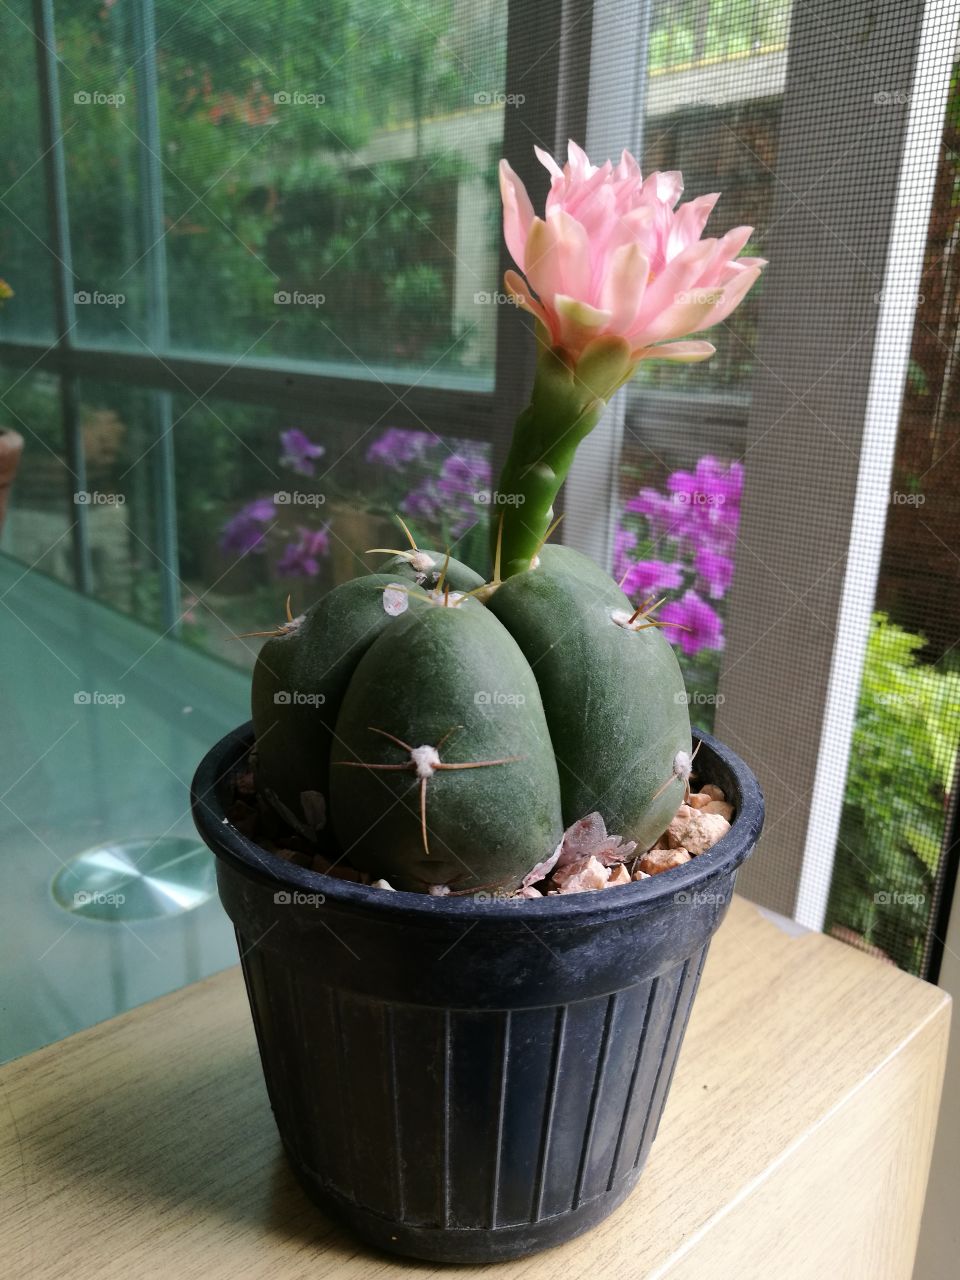 cactus plant with beautiful pink flower.